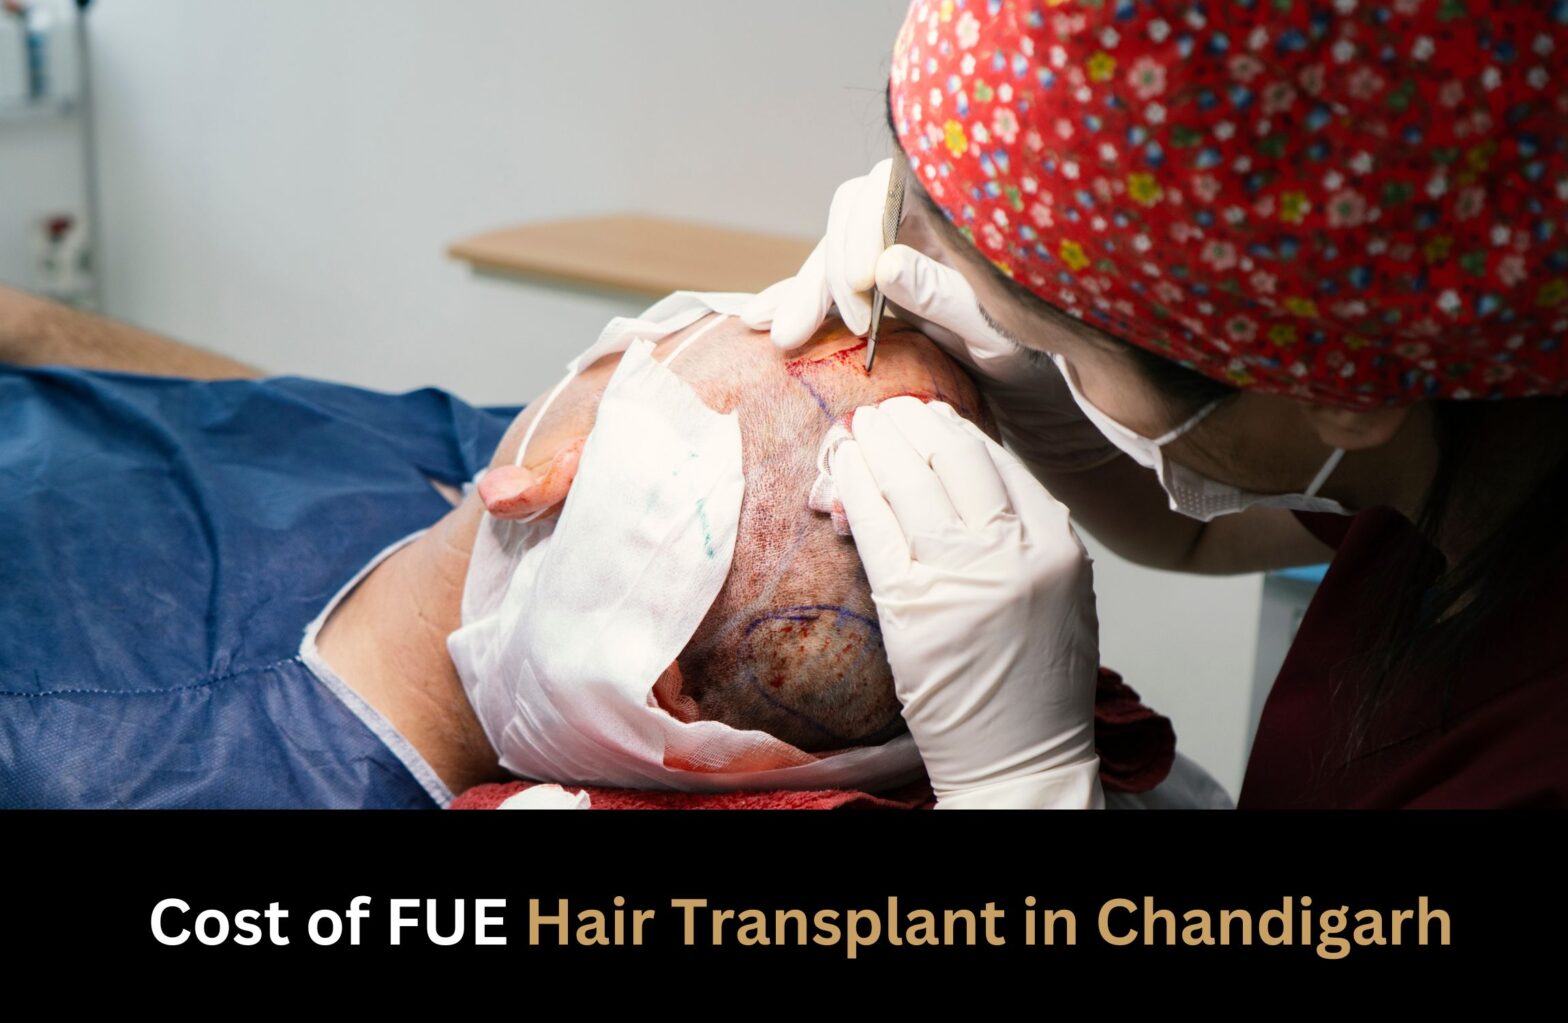 Cost of FUE hair transplant in Chandigarh